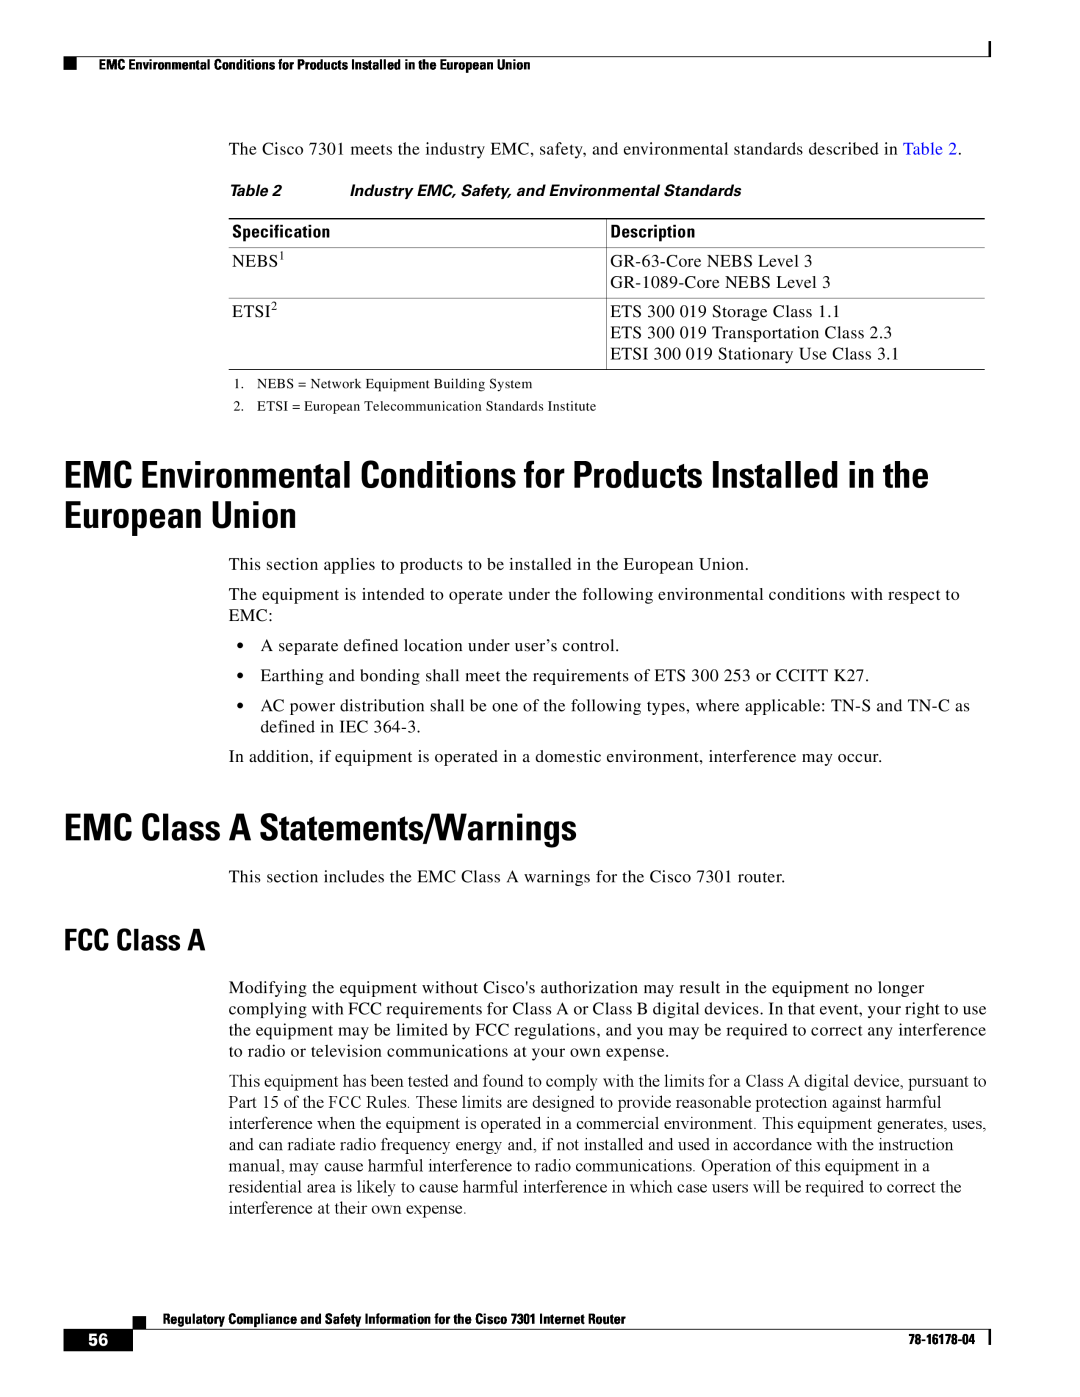 Cisco Systems CISCO7301 manual EMC Class A Statements/Warnings, FCC Class A 